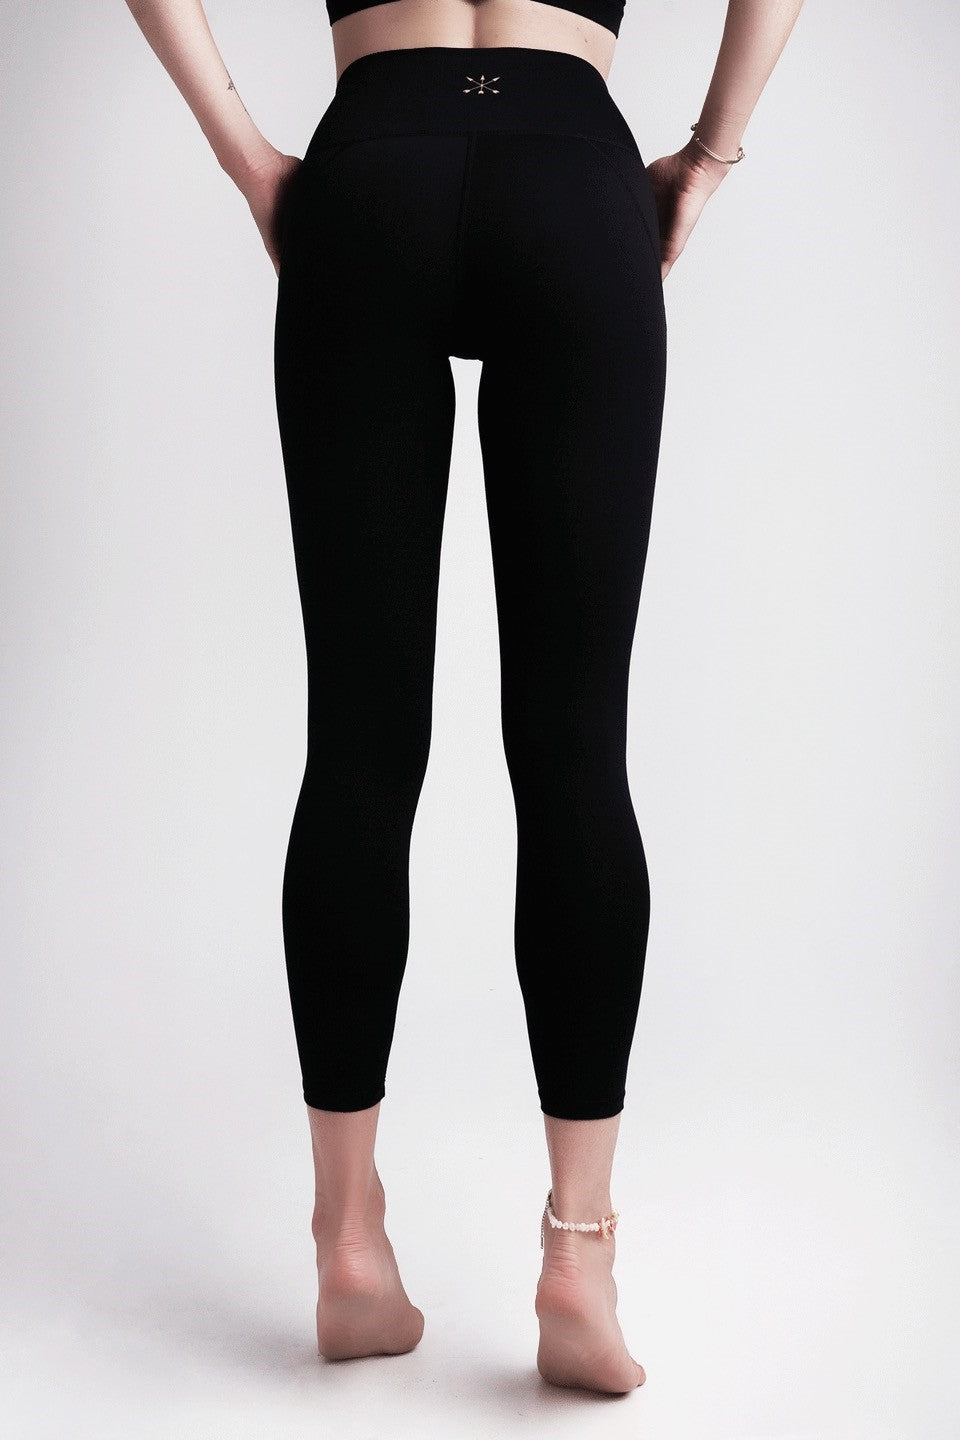 Soft Recycled Leggings With Pockets - Black on model from behind